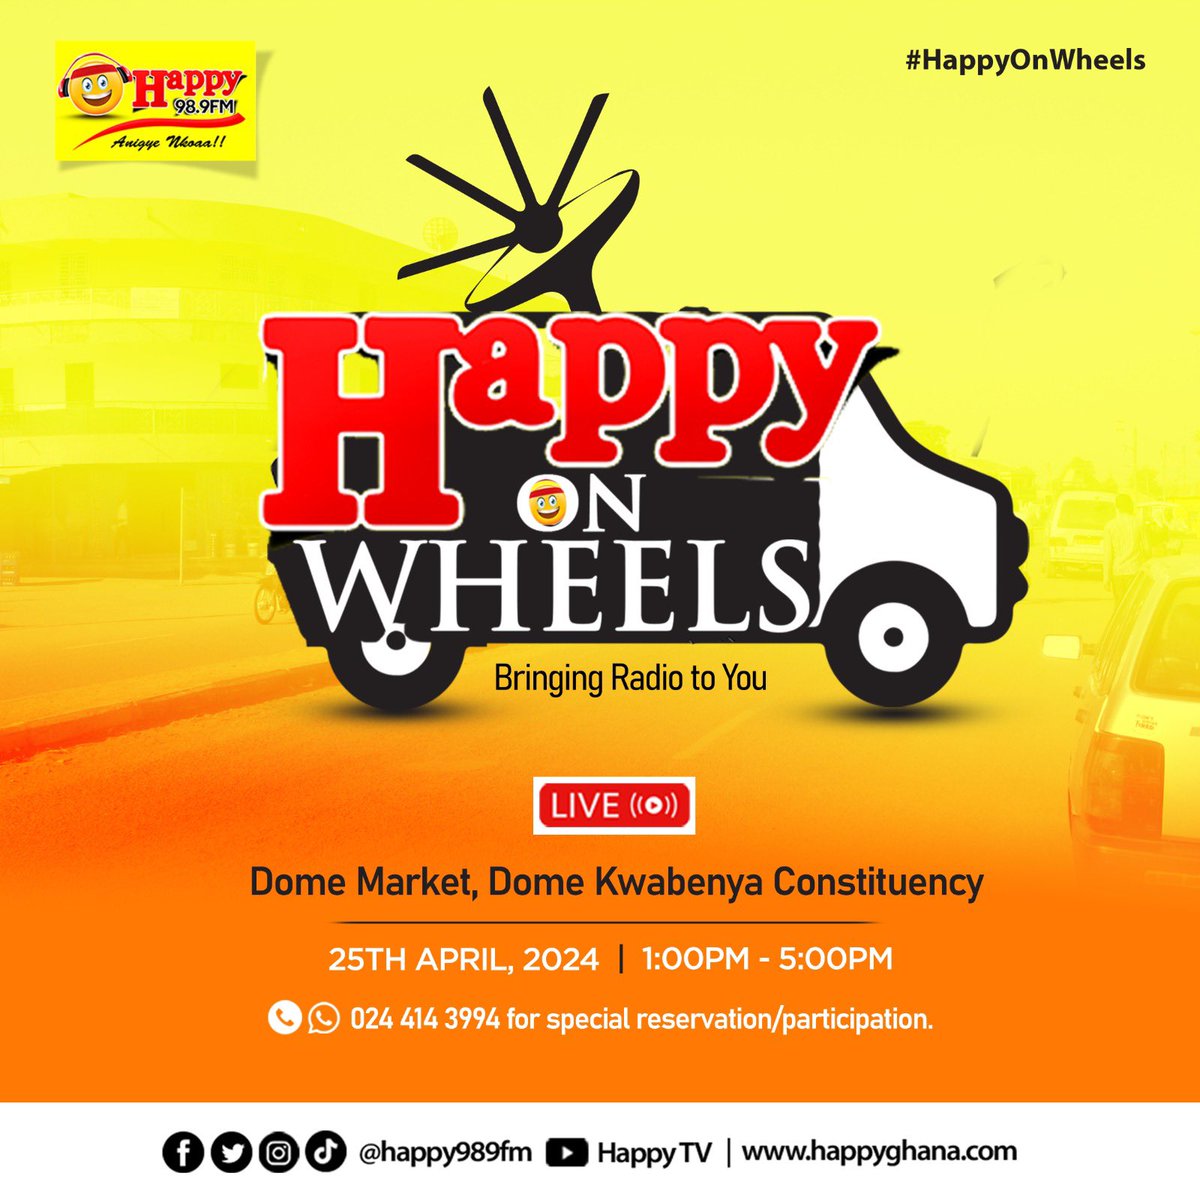 Dome Kwabenya Constituency , are you ready? Join us at Dome Market, this Thursday for another thrilling episode of #HappyOnWheels as we engage you on various developmental issues confronting your community and finding solutions to them. Trust us, it’s going to be a blast!